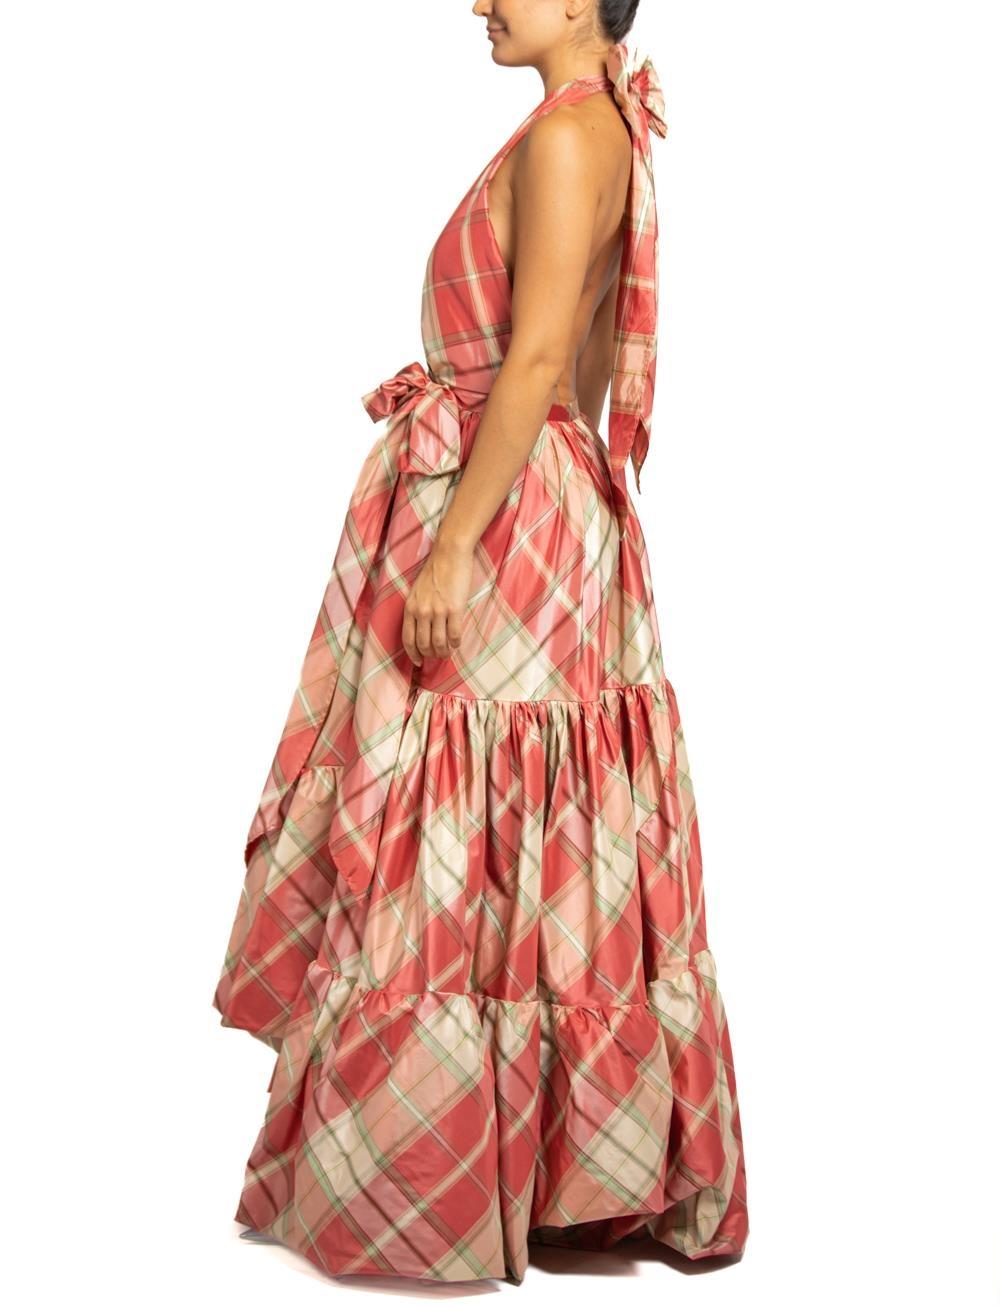 MORPHEW COLLECTION Pink & Aqua Silk Taffeta Plaid Gown MASTER
MORPHEW COLLECTION is made entirely by hand in our NYC Ateliér of rare antique materials sourced from around the globe. Our sustainable vintage materials represent over a century of